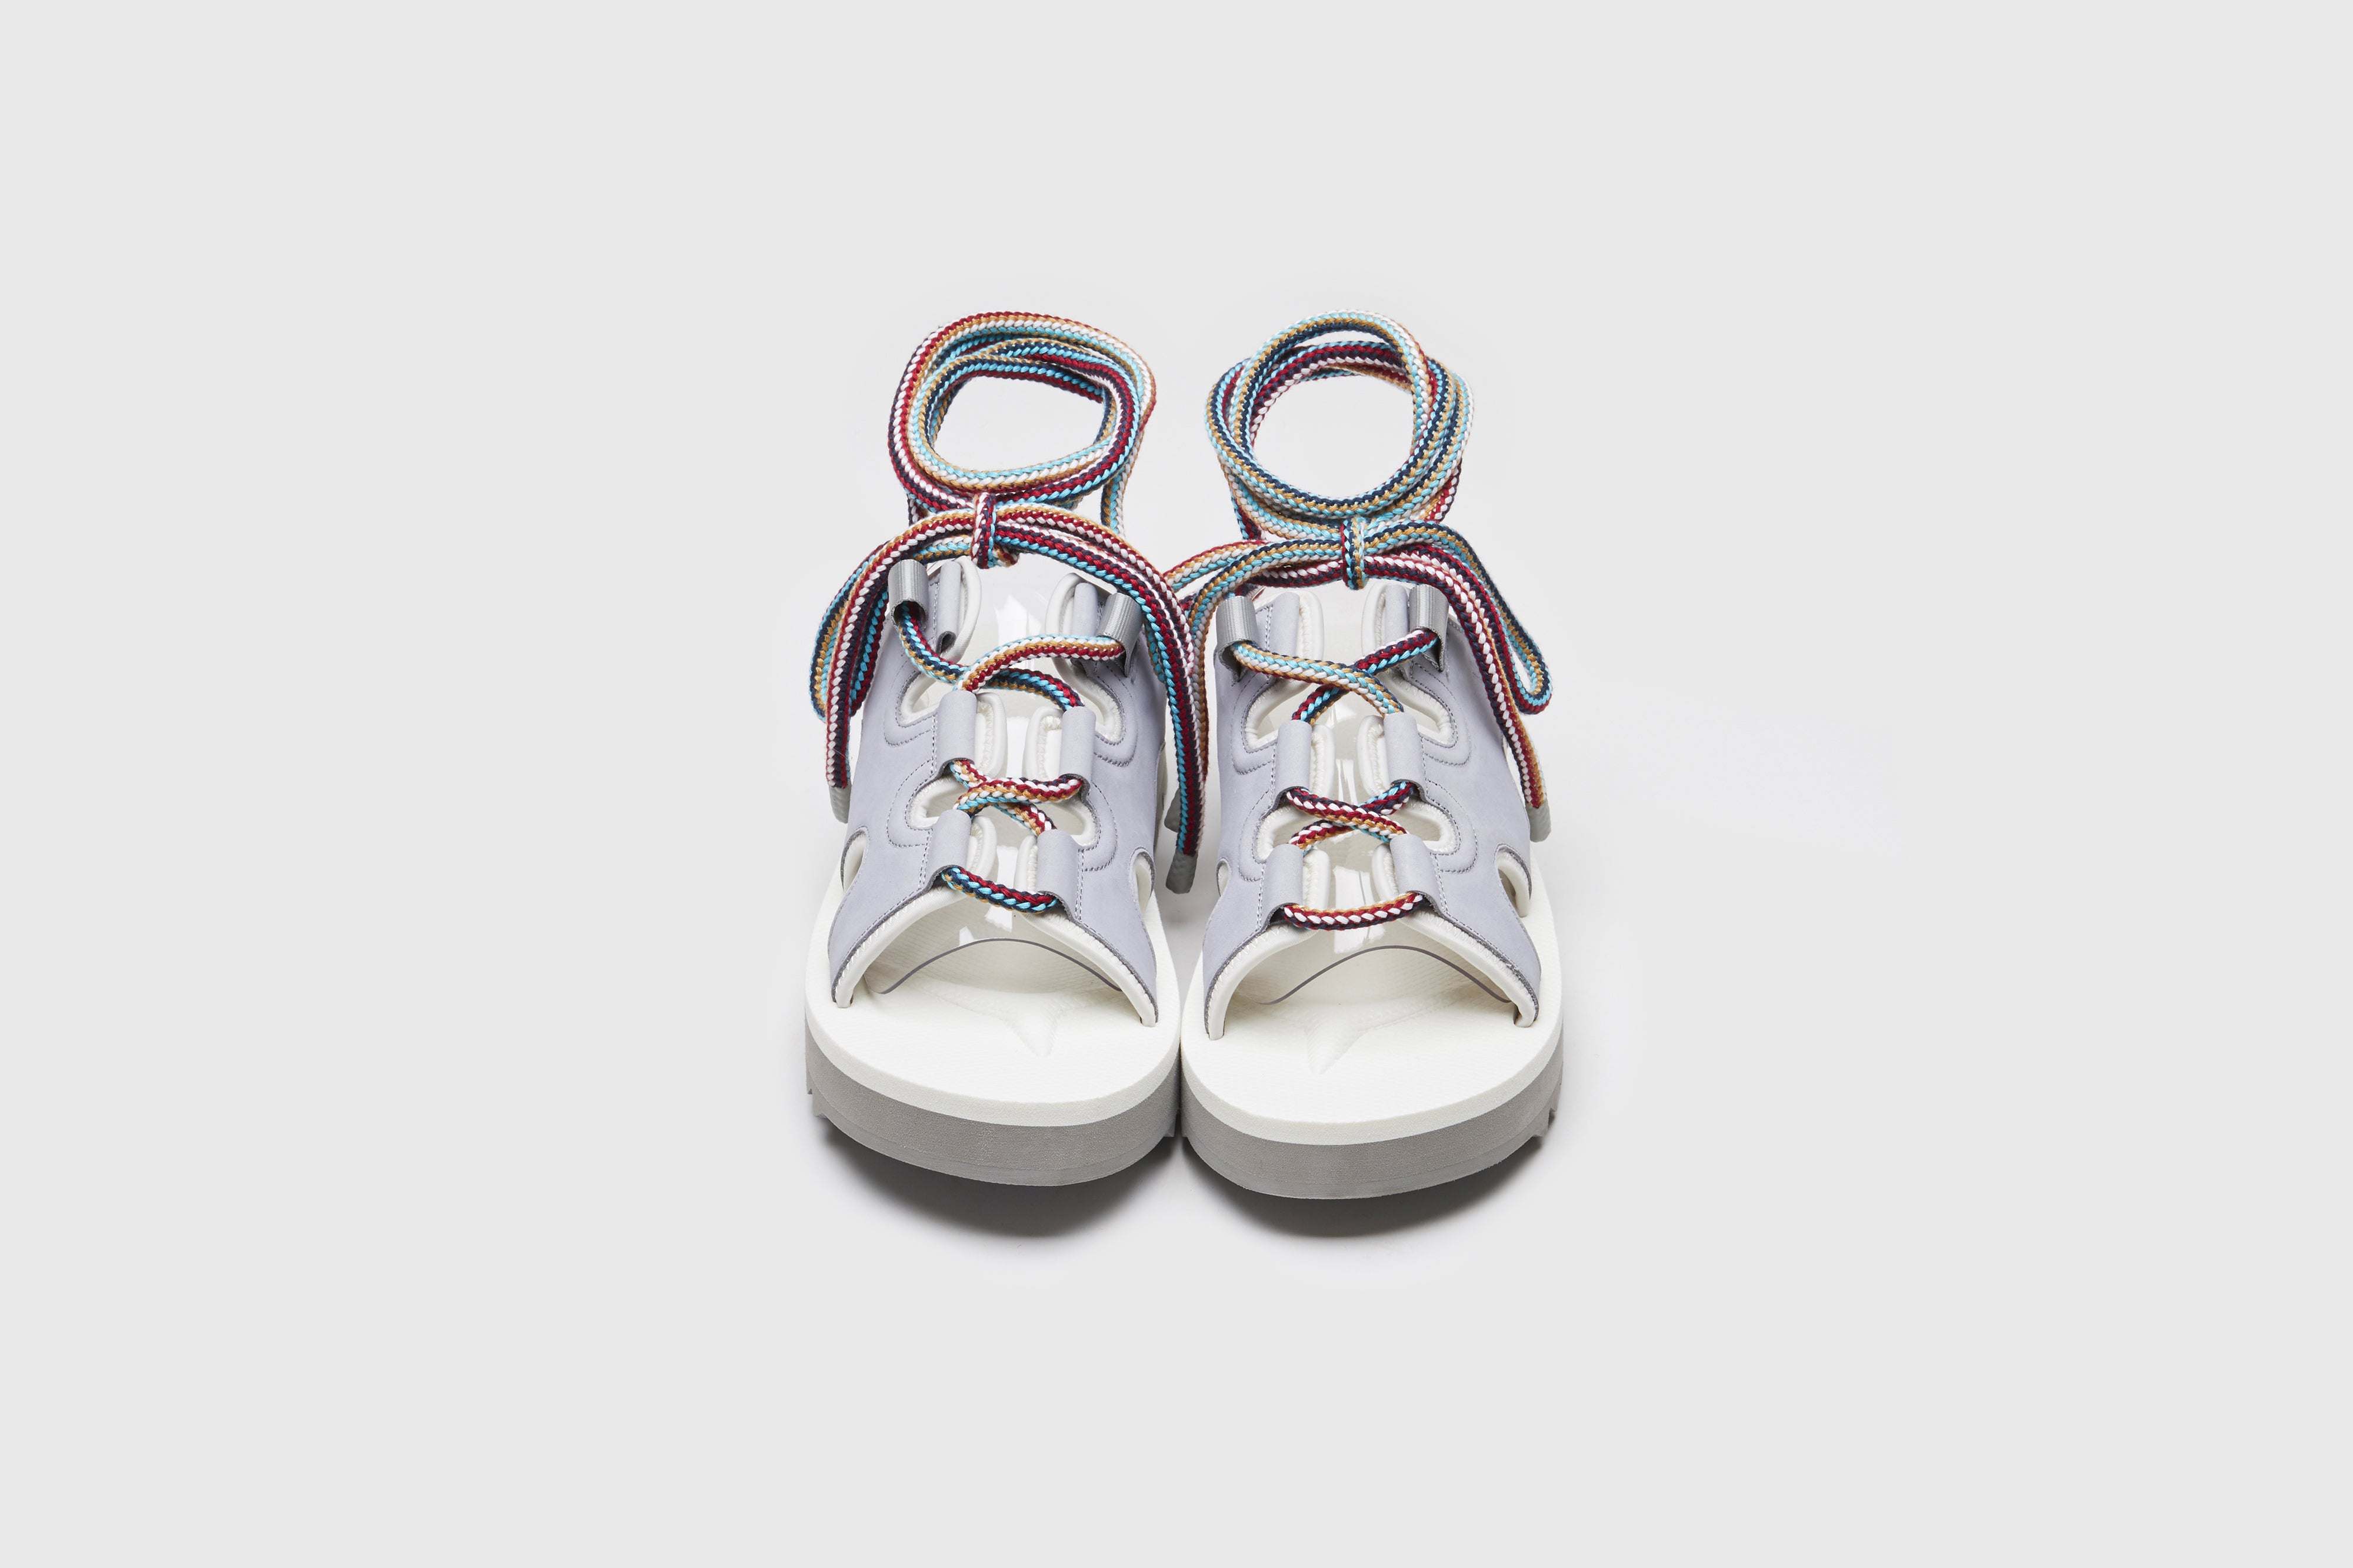 SUICOKE RAY-AB slides with gray x white nylon upper, gray x white midsole and sole, strap and logo patch. From Spring/Summer 2023 collection on eightywingold Web Store, an official partner of SUICOKE. OG-326AB GRAY X WHITE